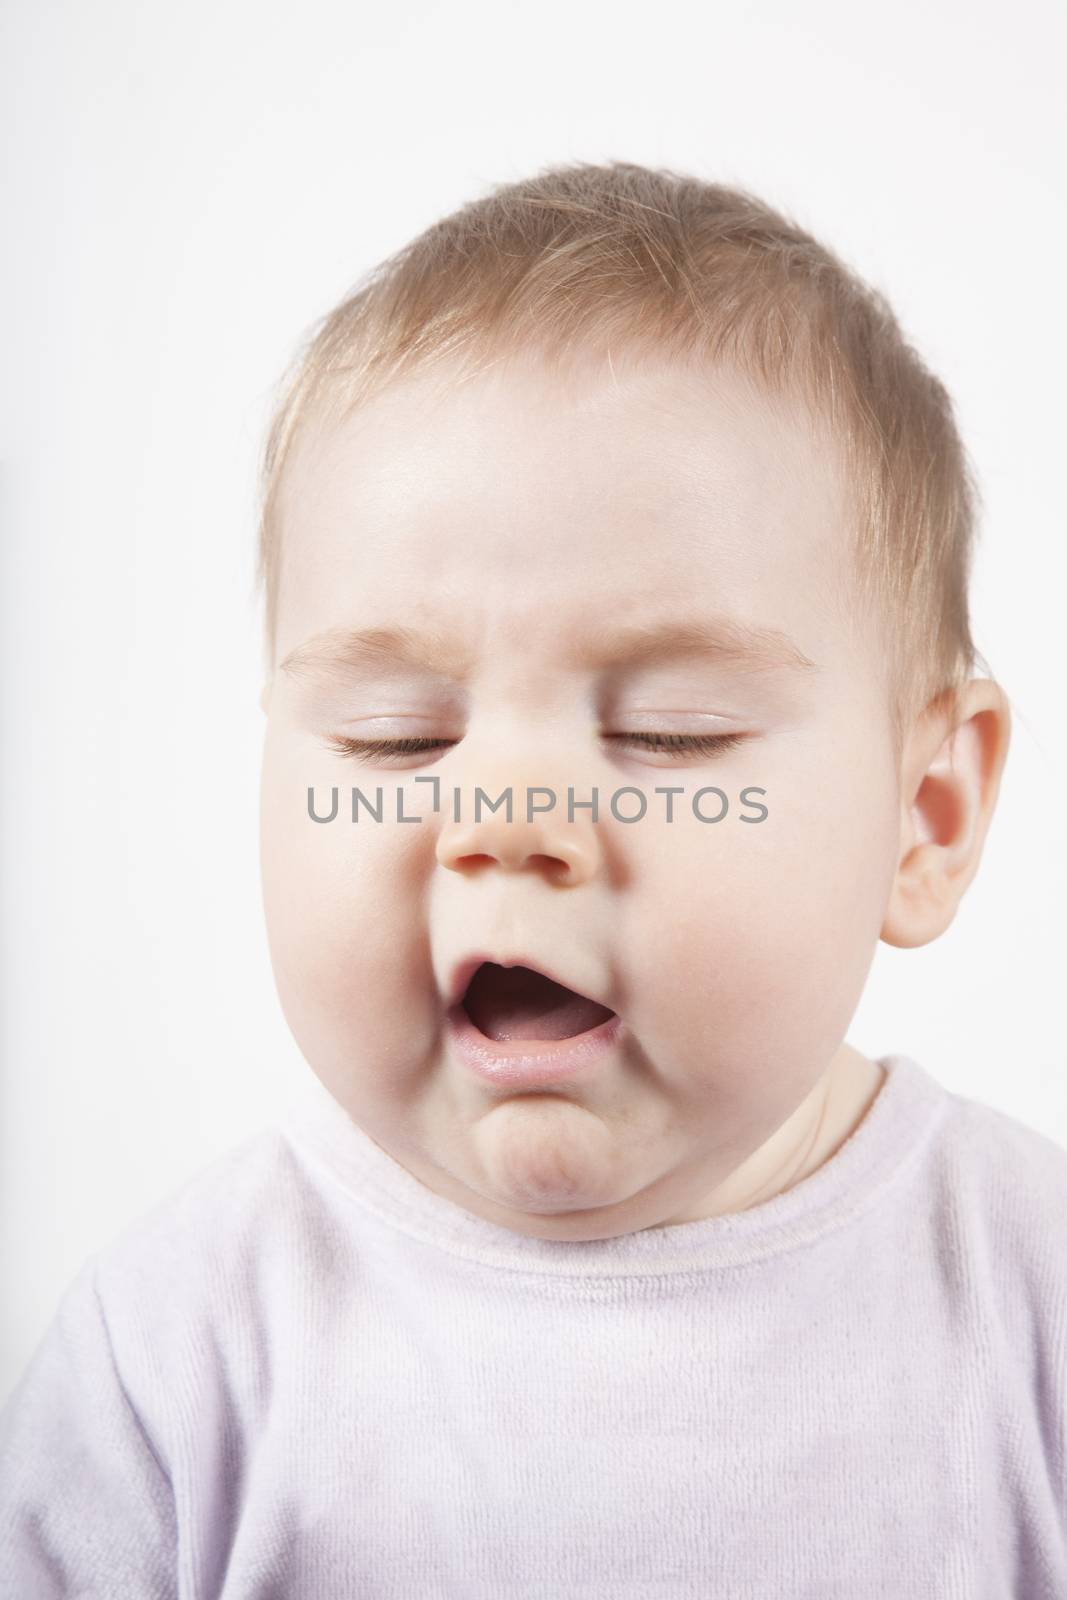 disgusted or sneeze face baby by quintanilla